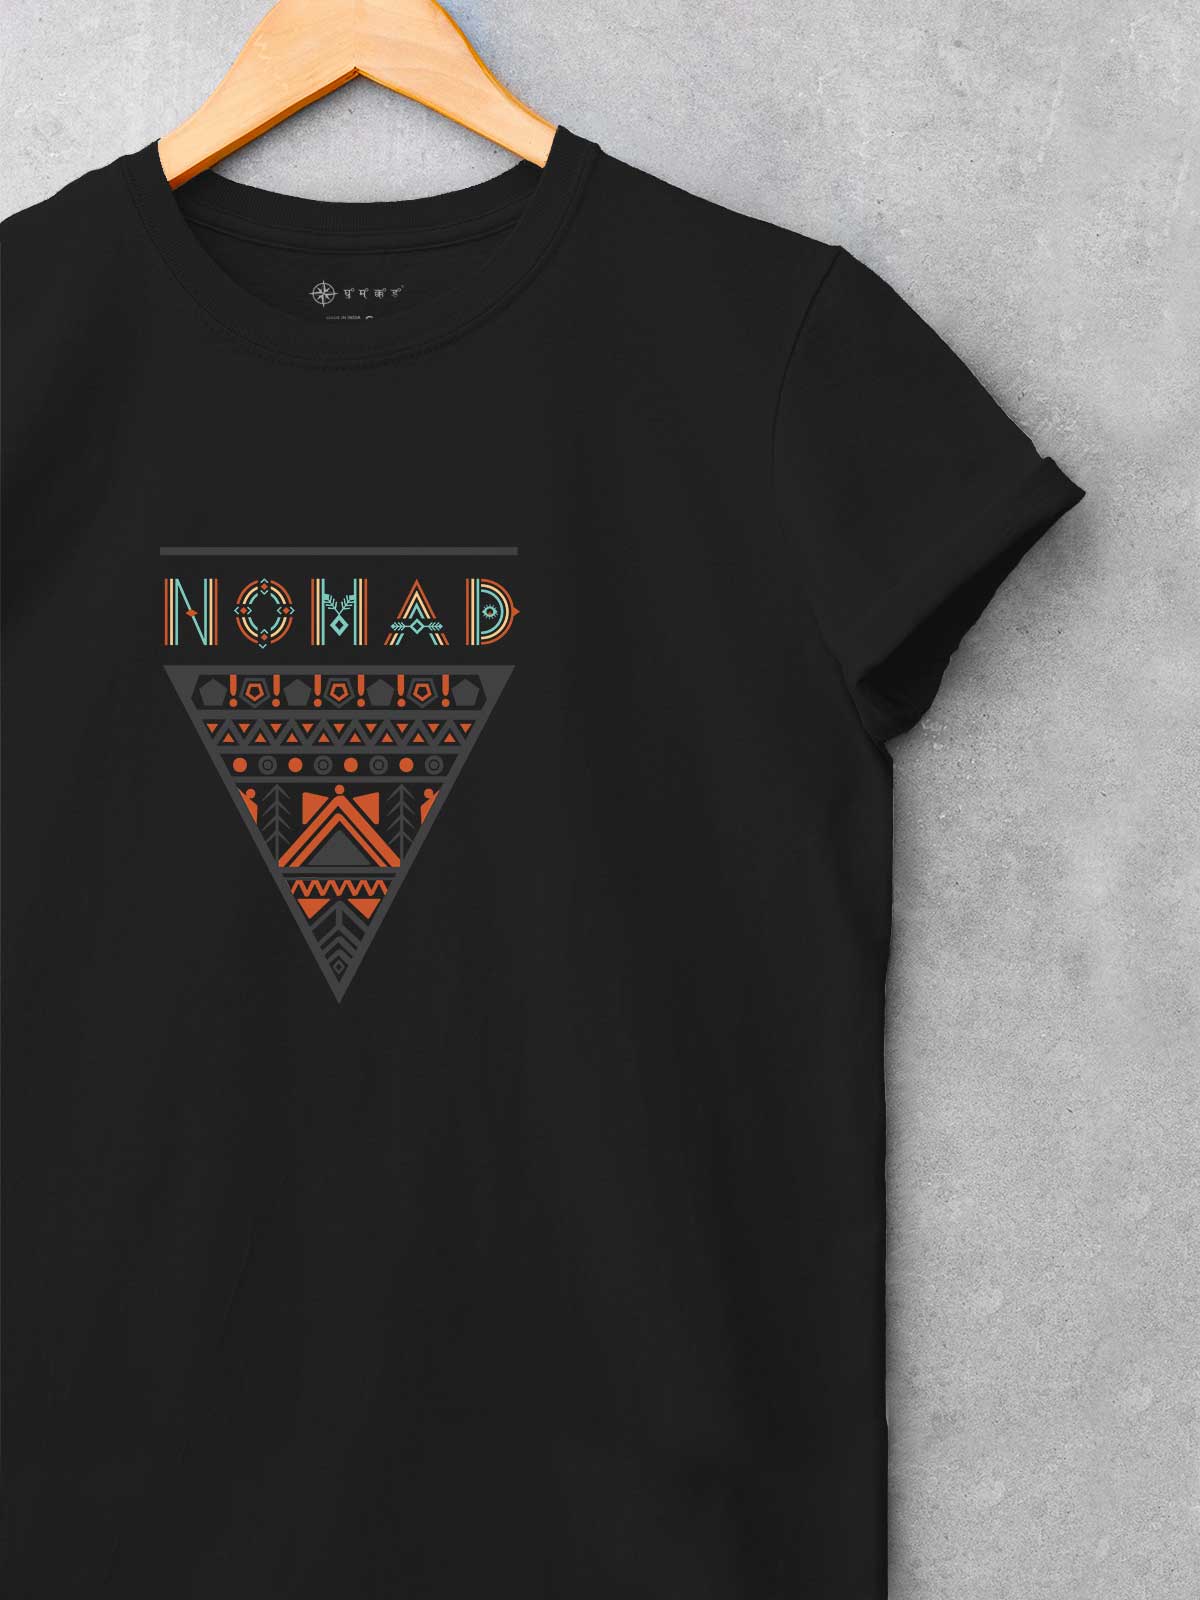 Nomad-printed-t-shirt-for-men by Ghumkkad